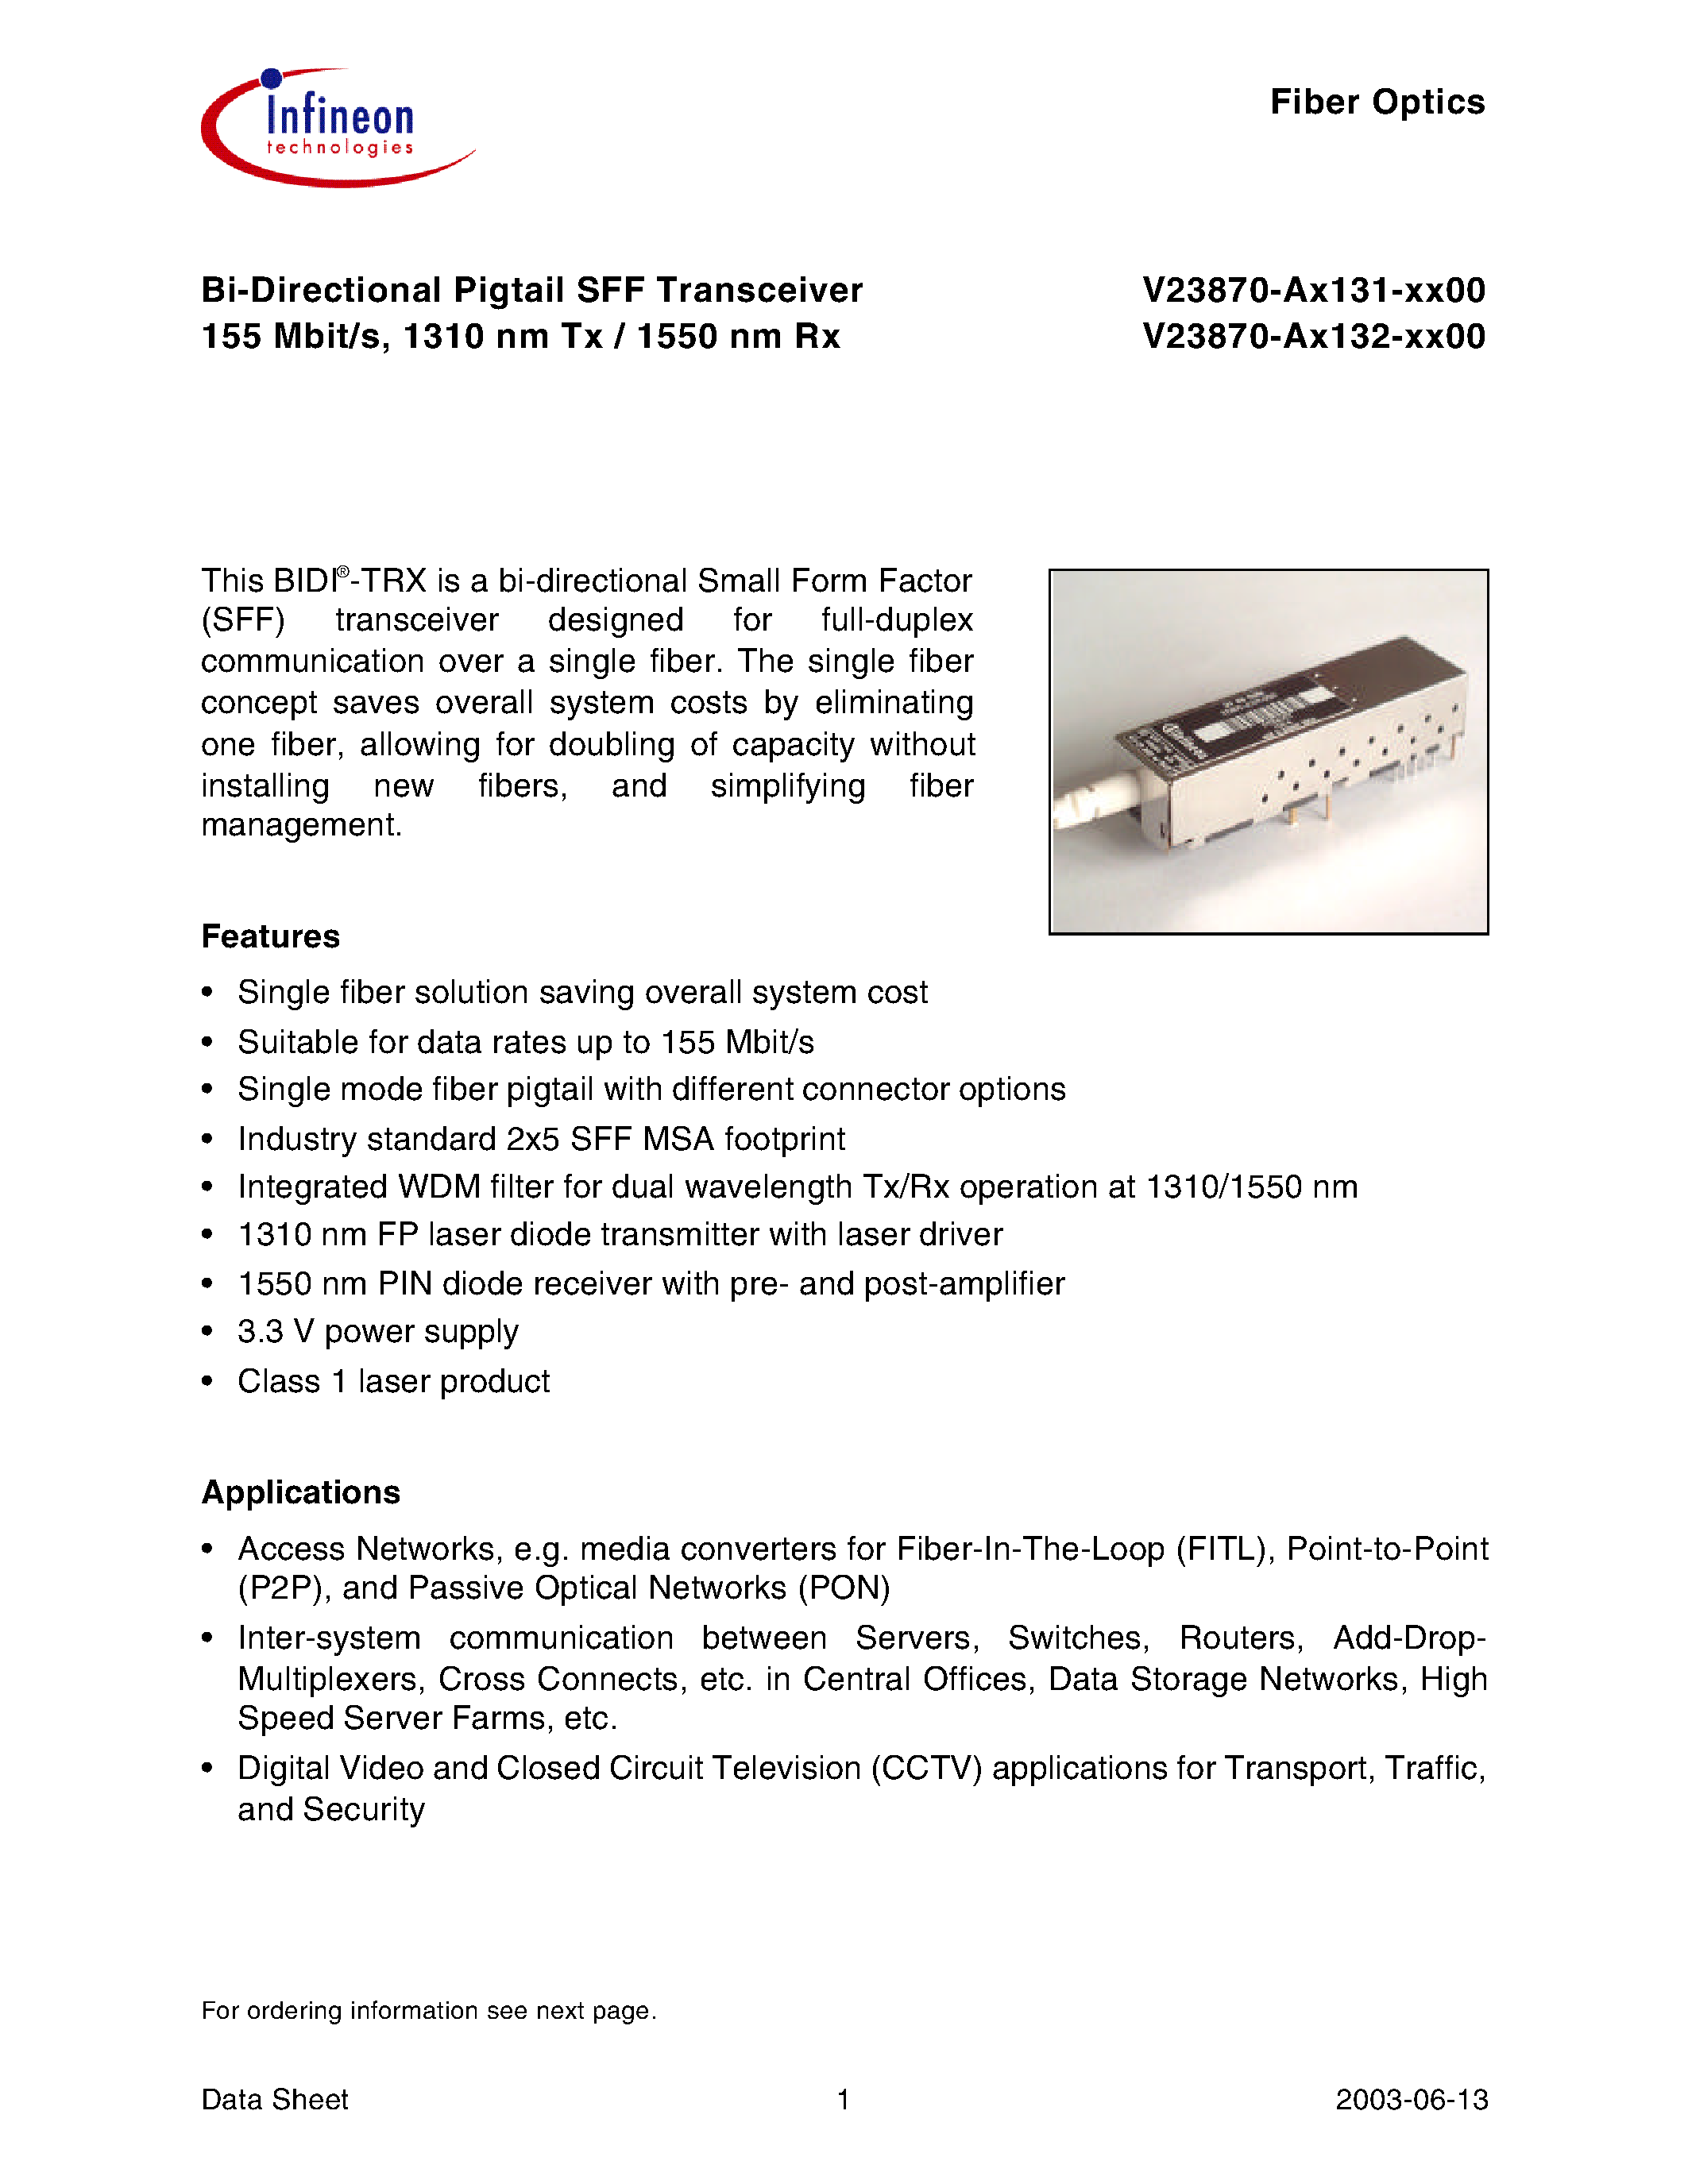 Datasheet V23870-A1131-B500 - Bi-Directional Pigtail SFF Transceiver 155 Mbit/s/ 1310 nm Tx / 1550 nm Rx page 1